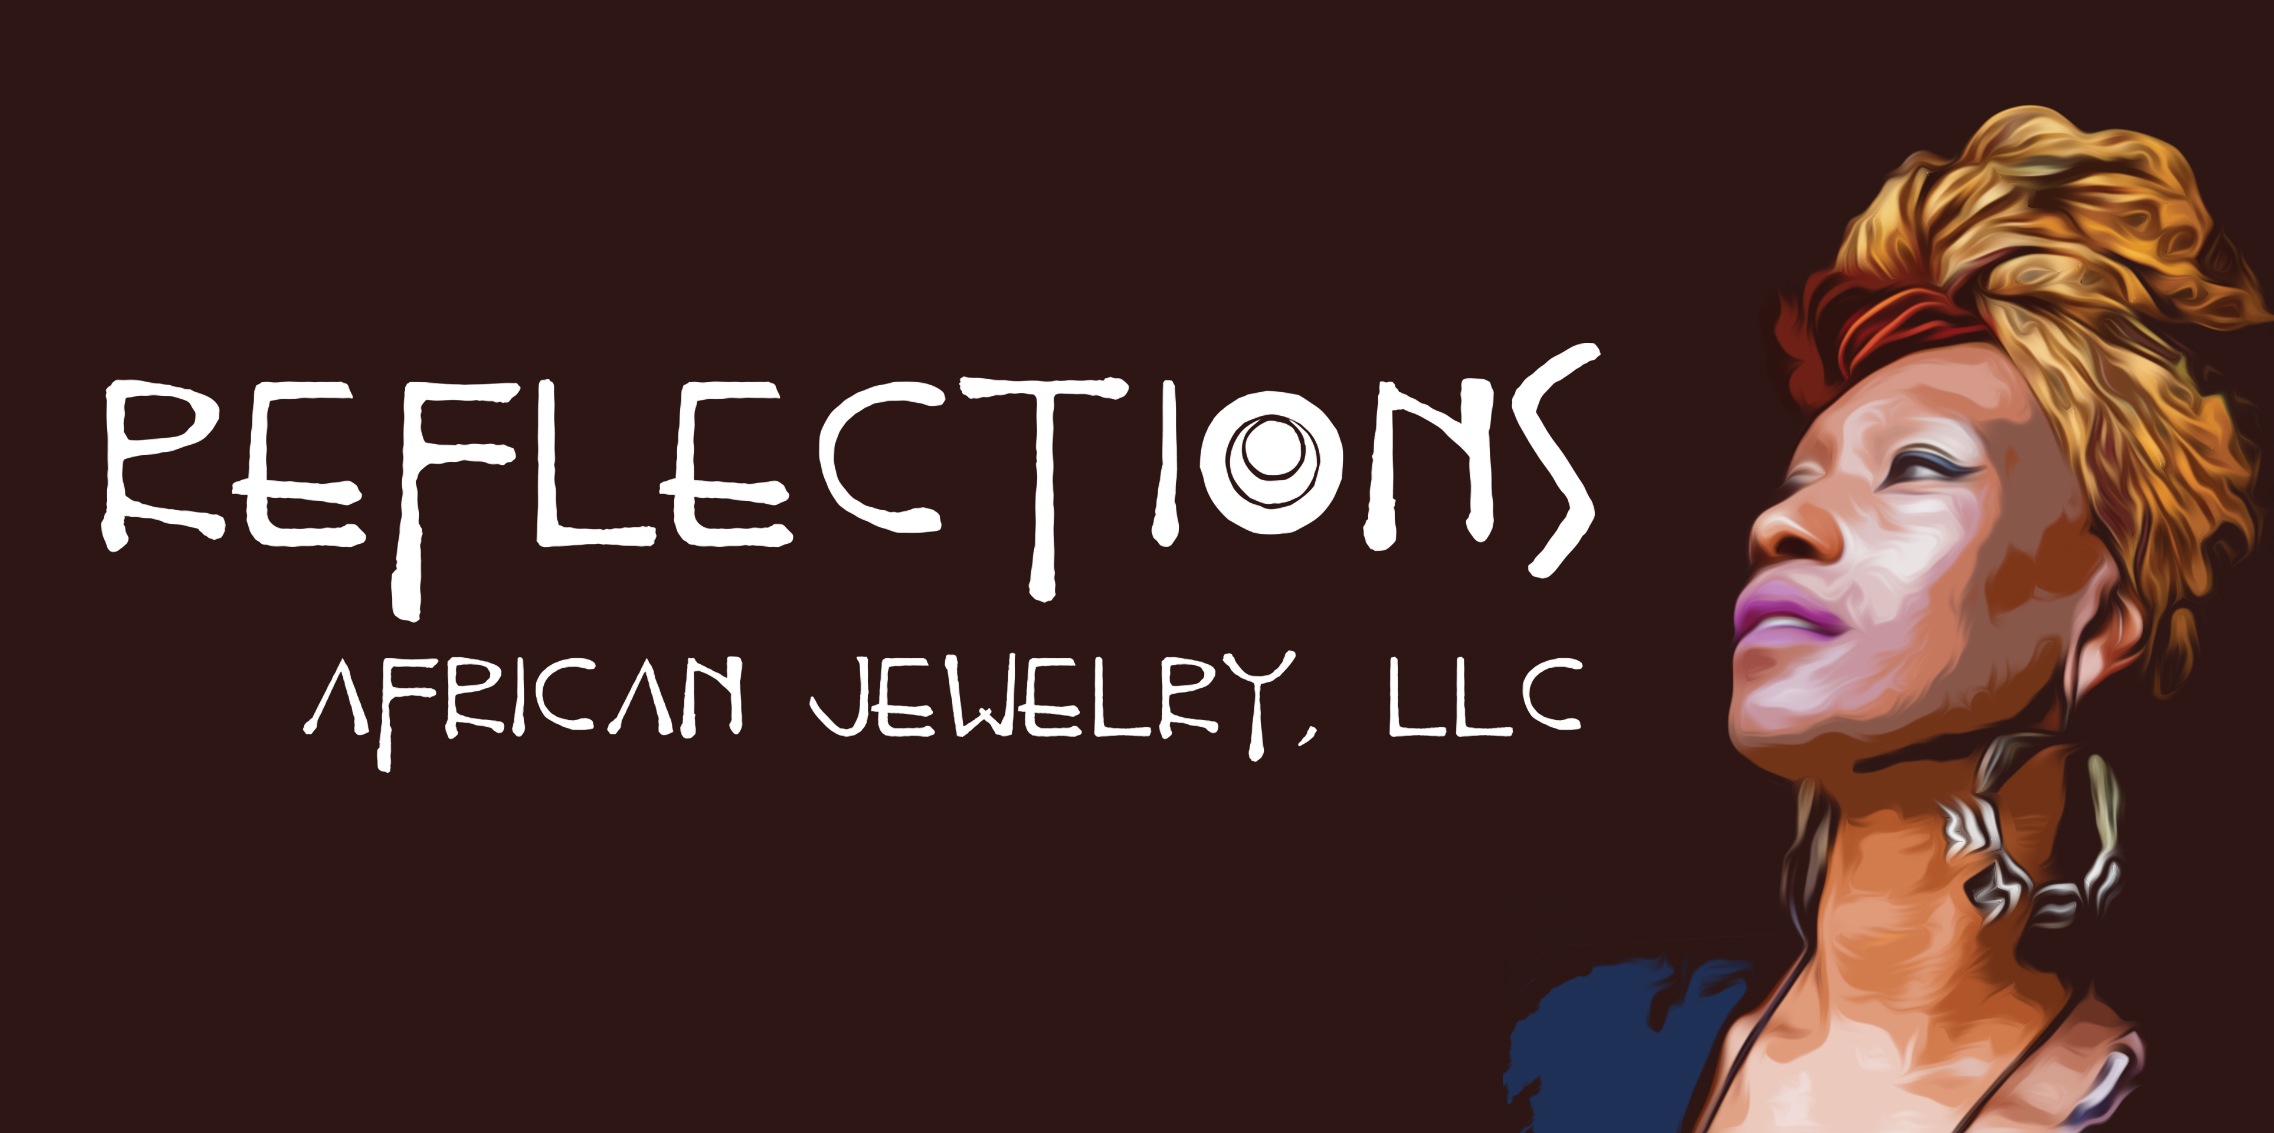 Reflections African Jewelry, LLC